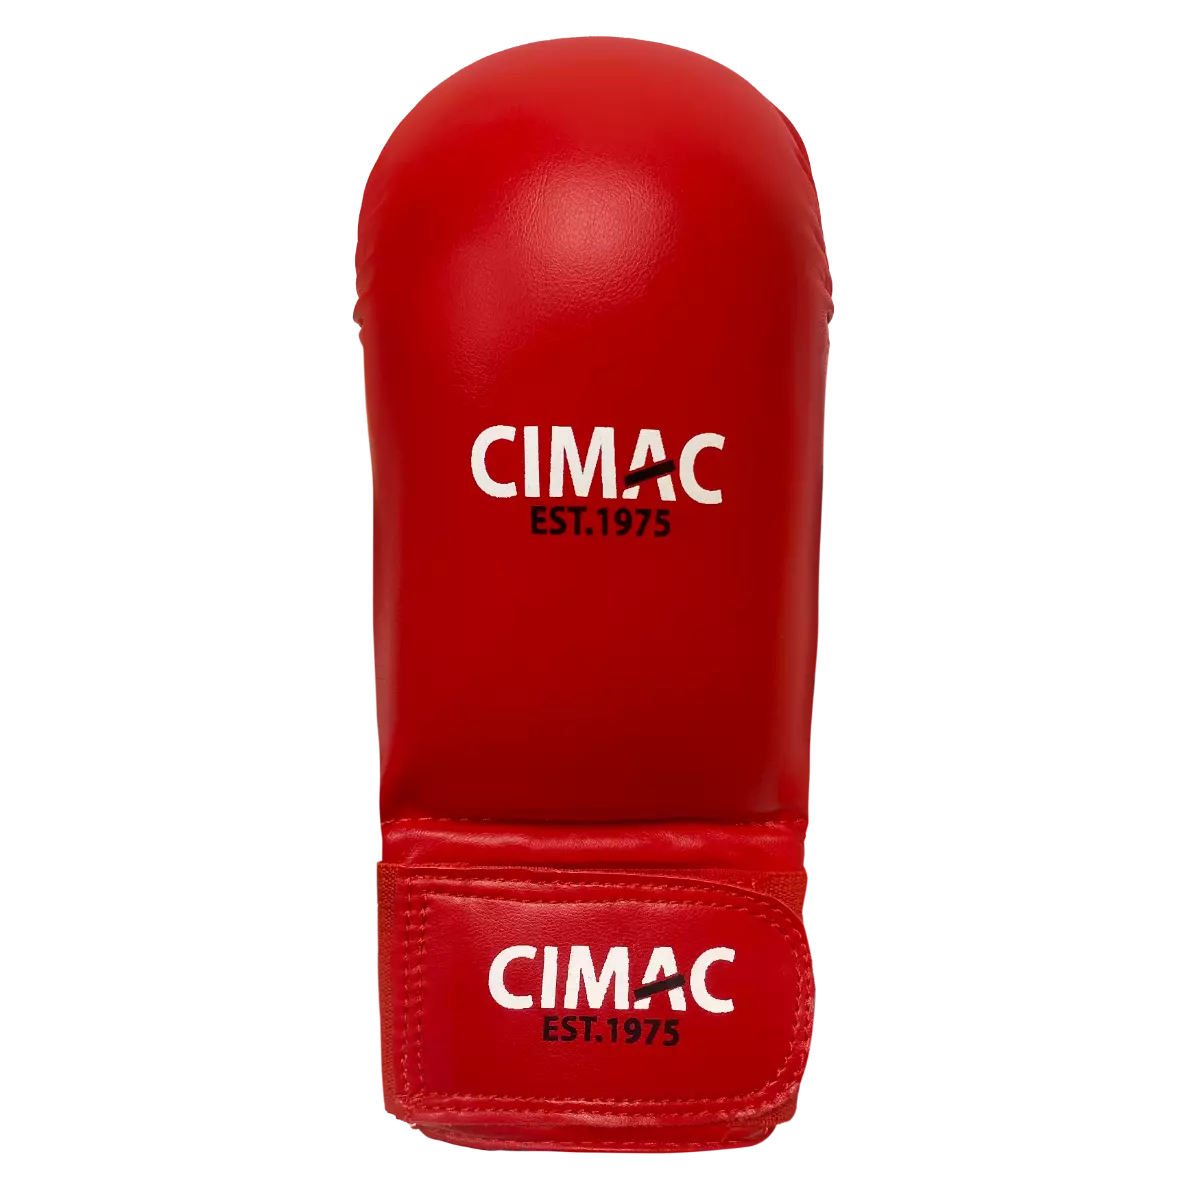 Cimac Competition Karate Mitts Gloves With Thumb